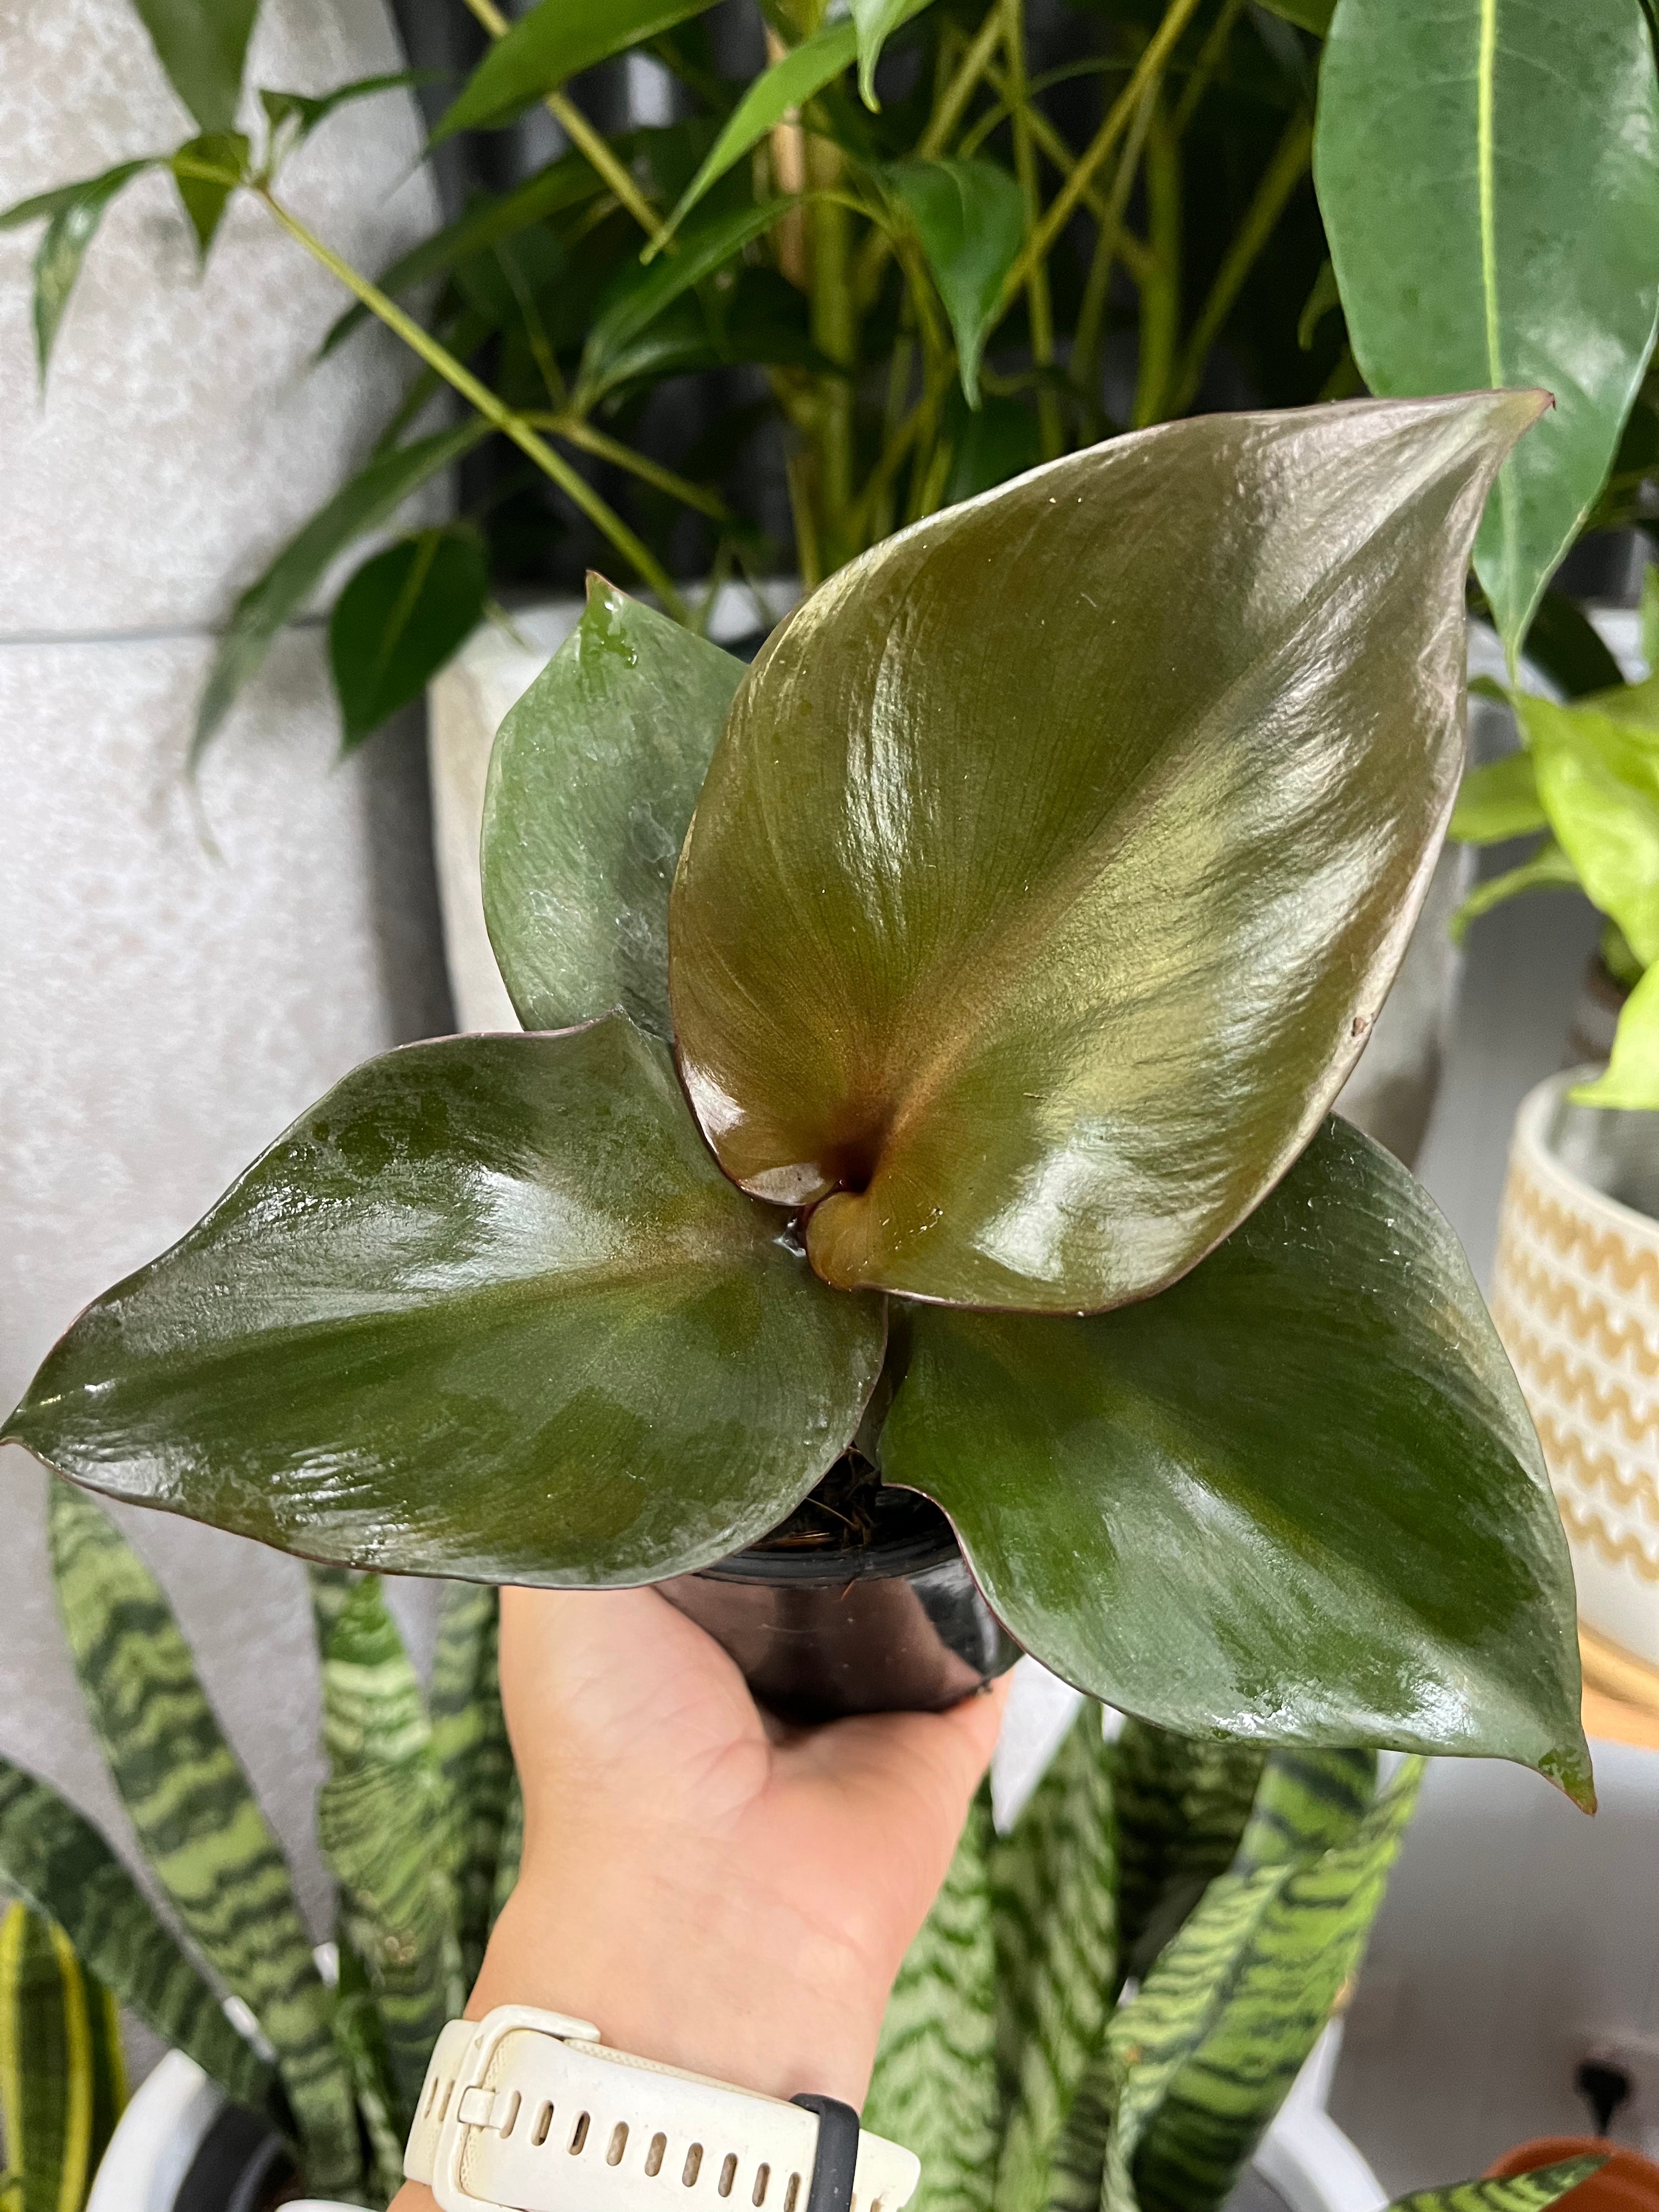 Philodendron ‘Red Heart’